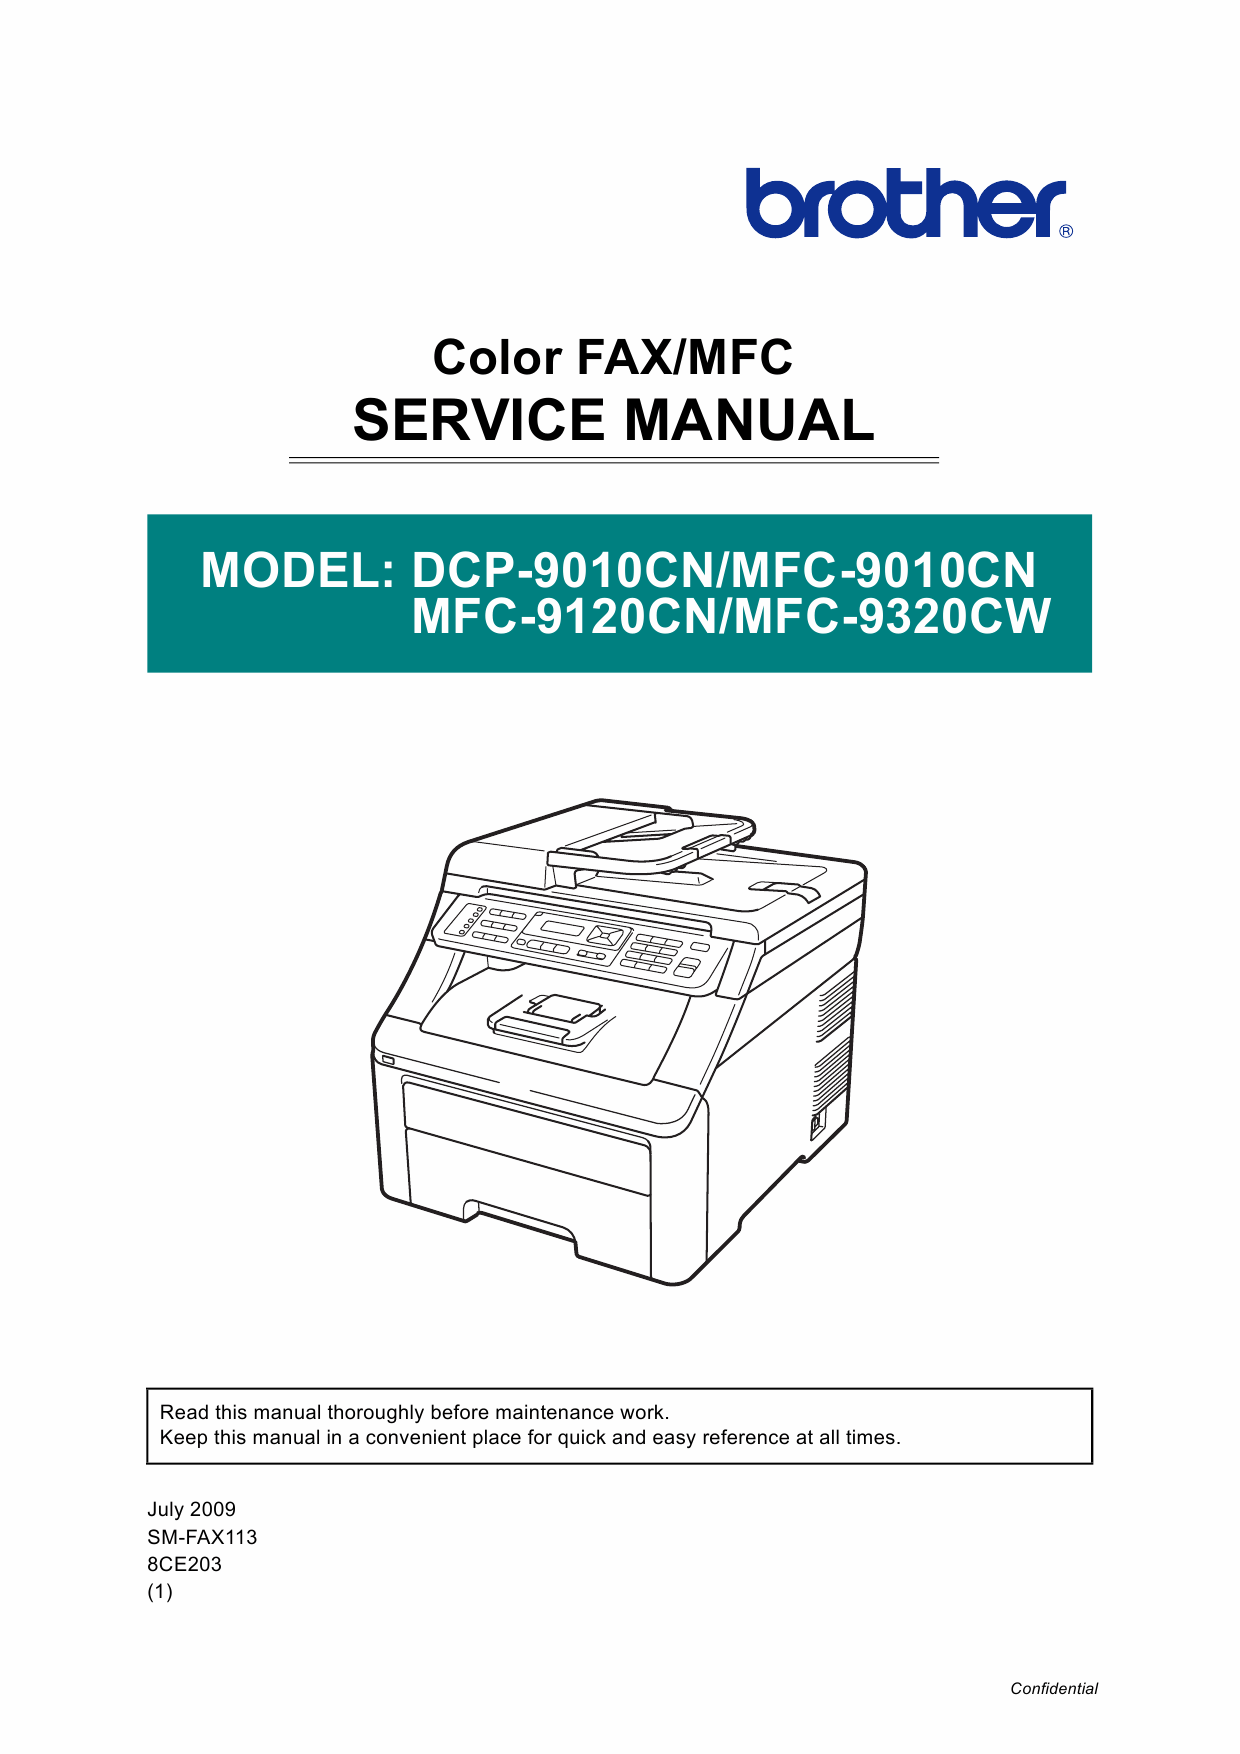 Brother MFC 9010 9120 9320 CN-CW DCP9010CN Service Manual-1